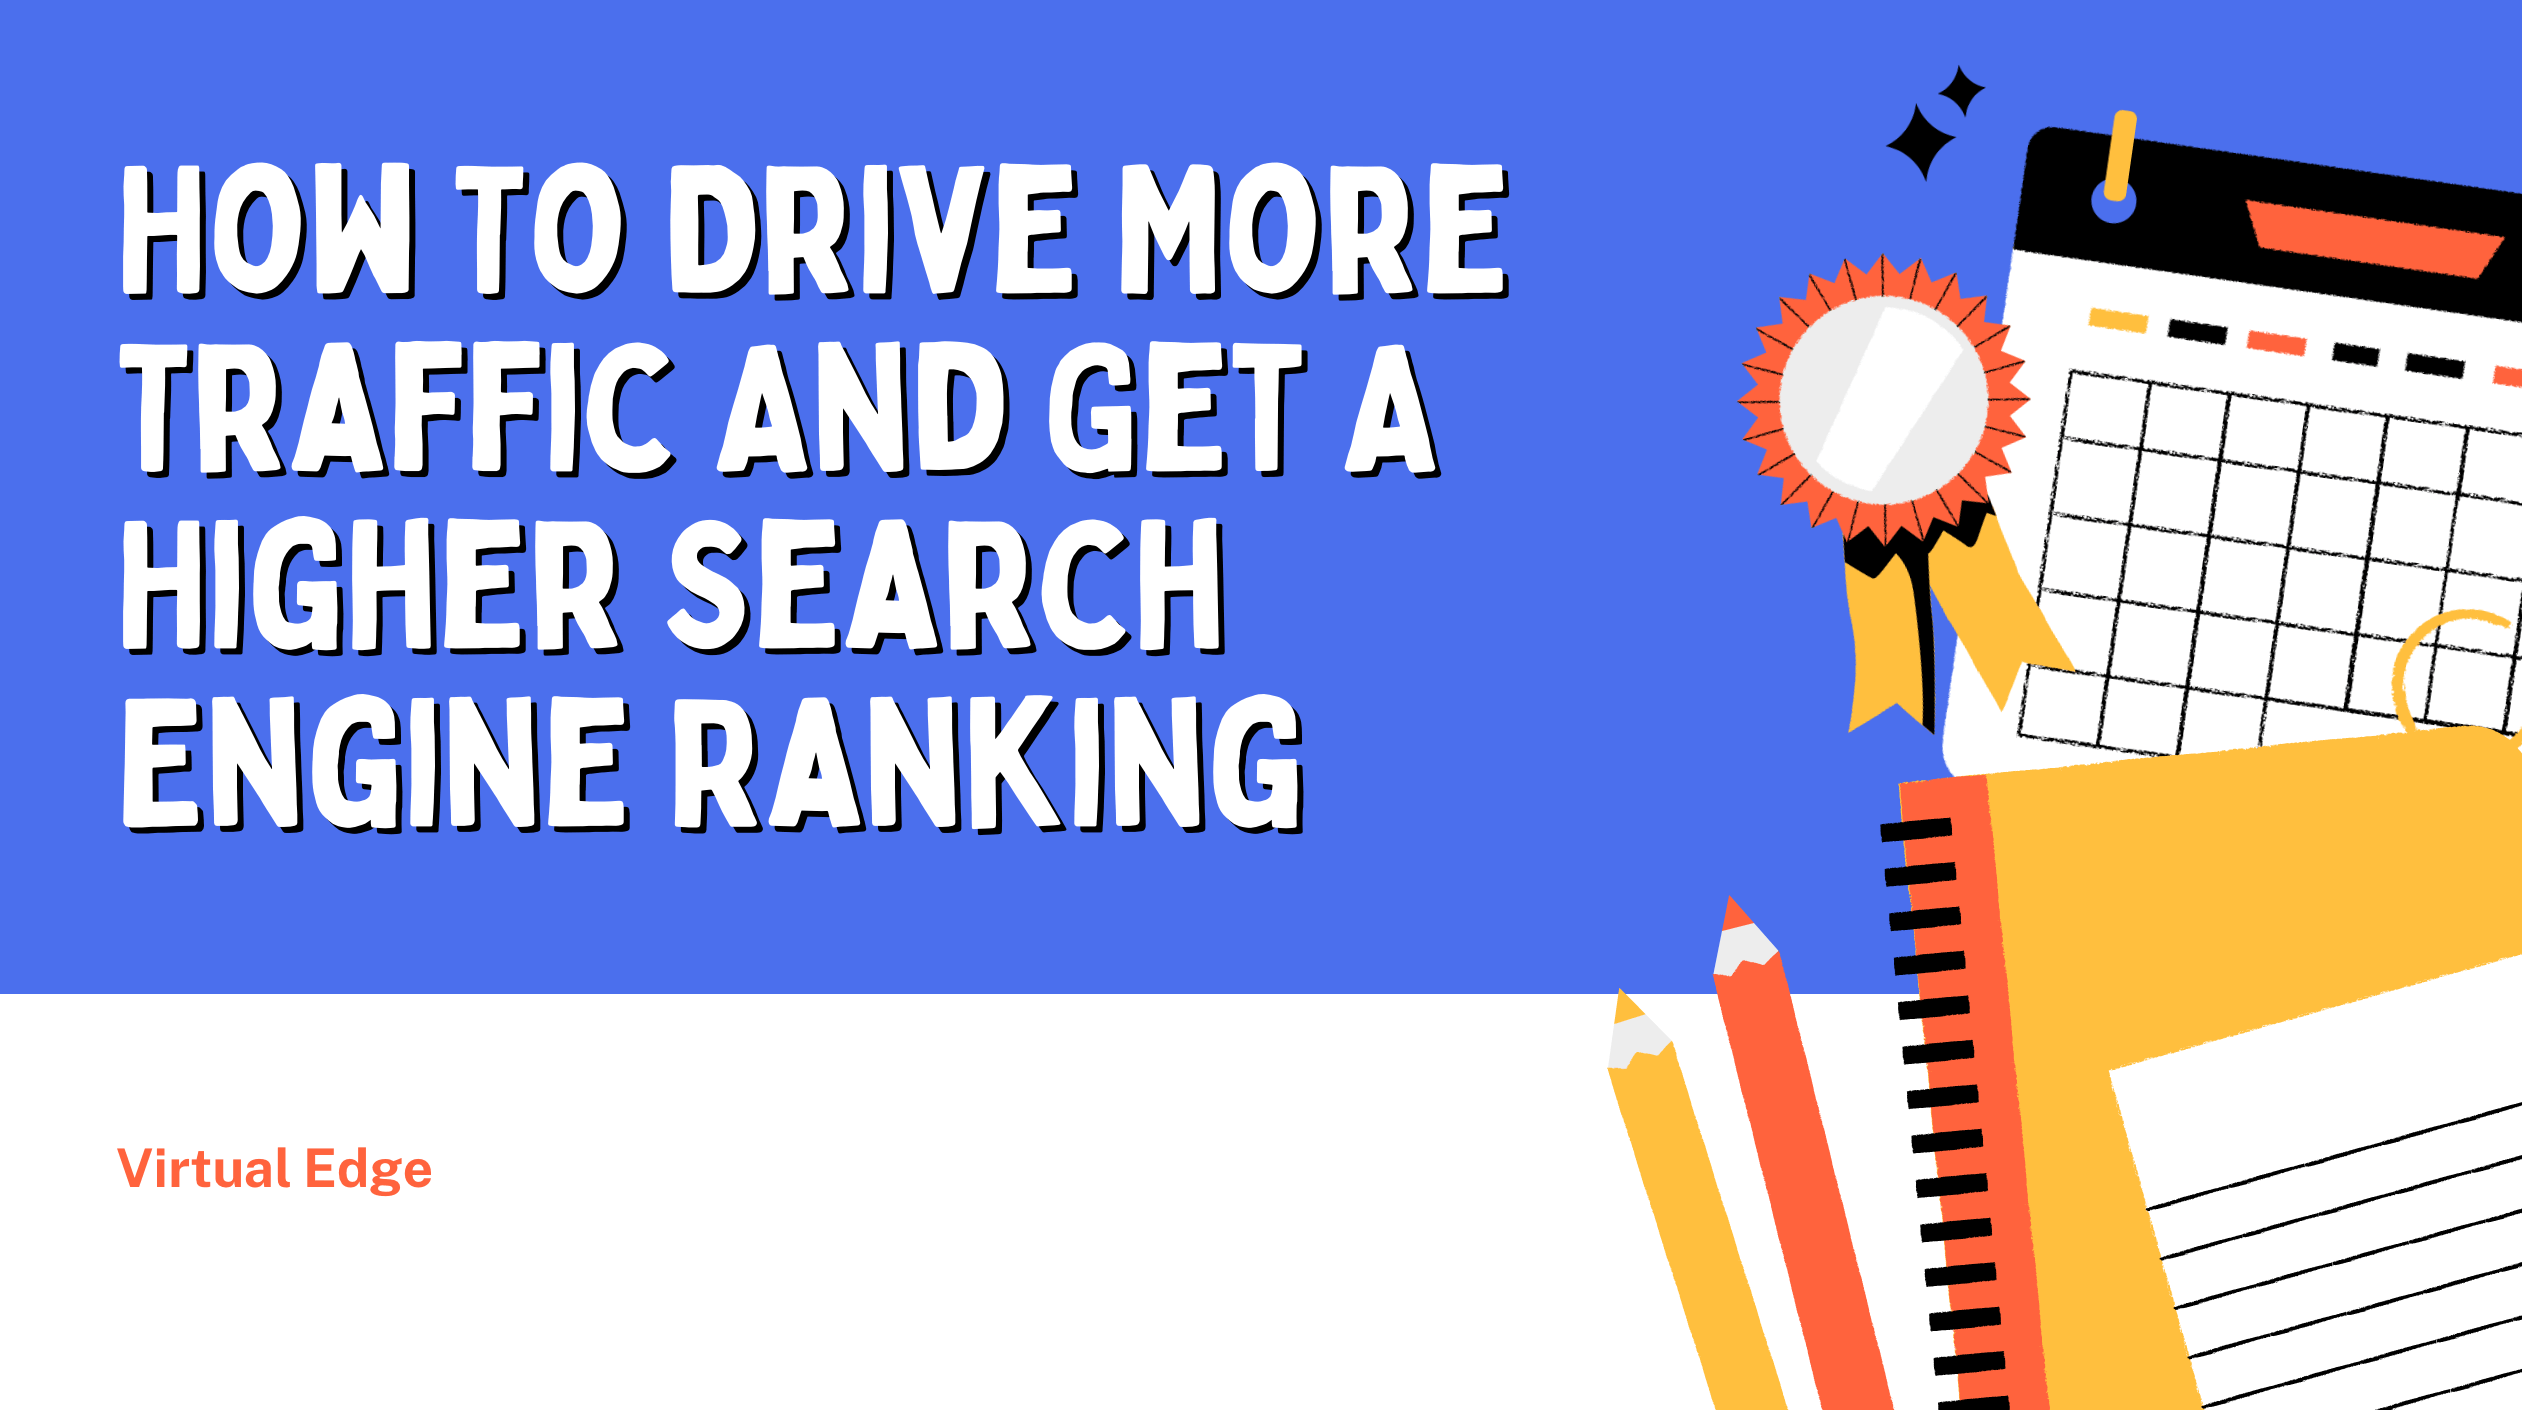 How To Drive More Traffic And Get A Higher Search Engine Ranking